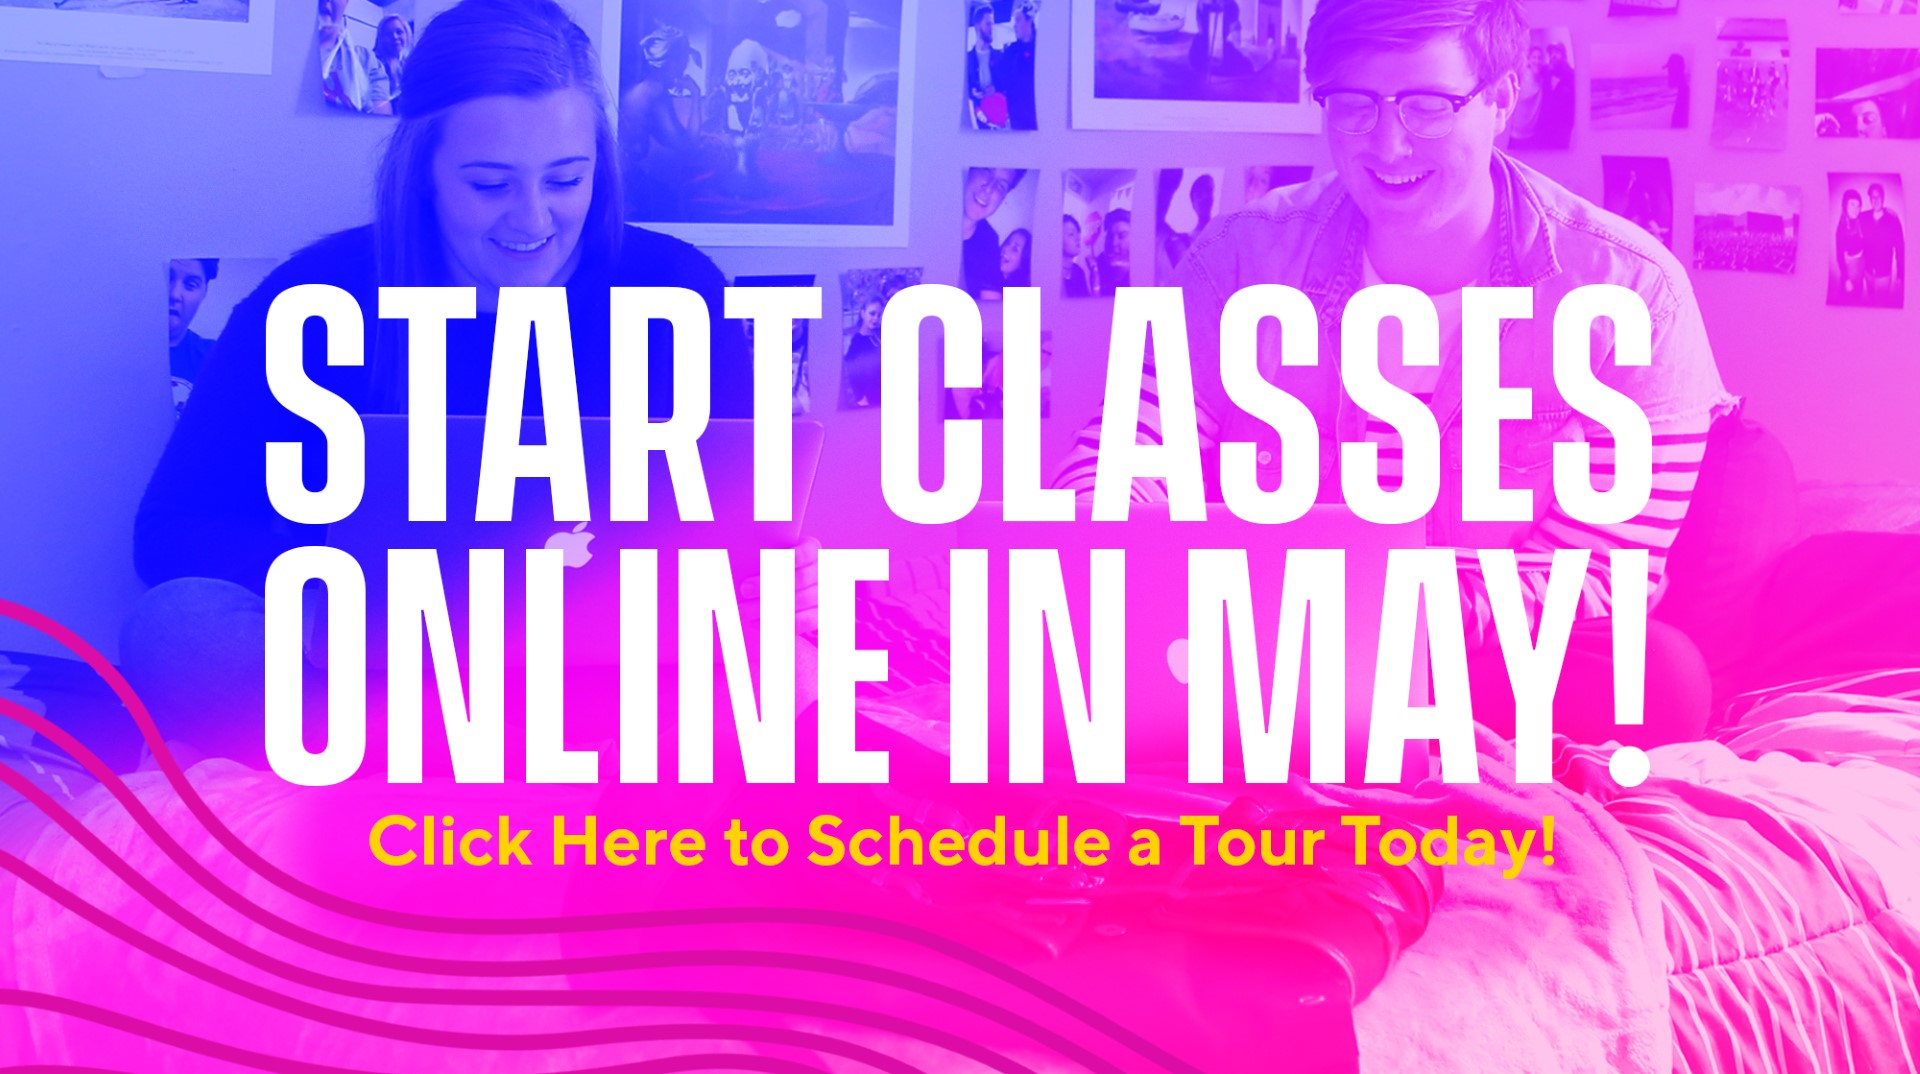 Start classes online in may